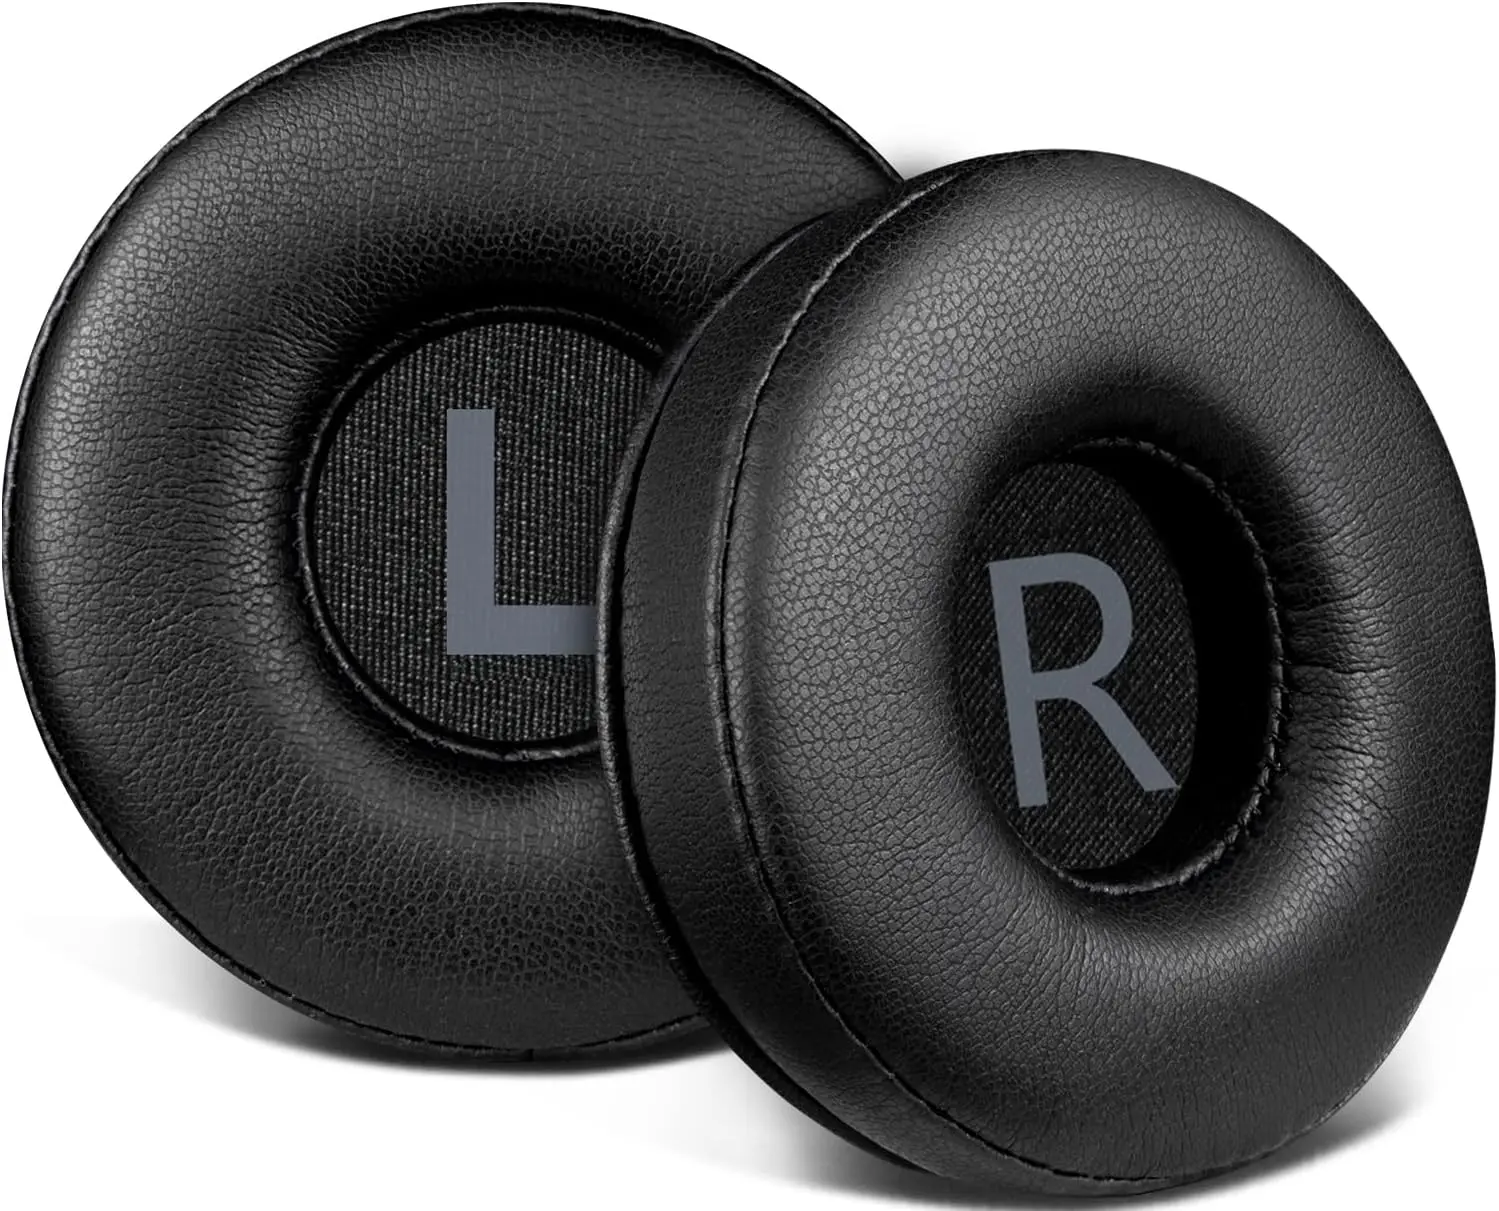 

The 70mm ear pads are for JBL Tune 450BT/Tune 500BT/Tune 510BT/Tune 520BT/Tune 600BTNC/Tune 660NC headphones